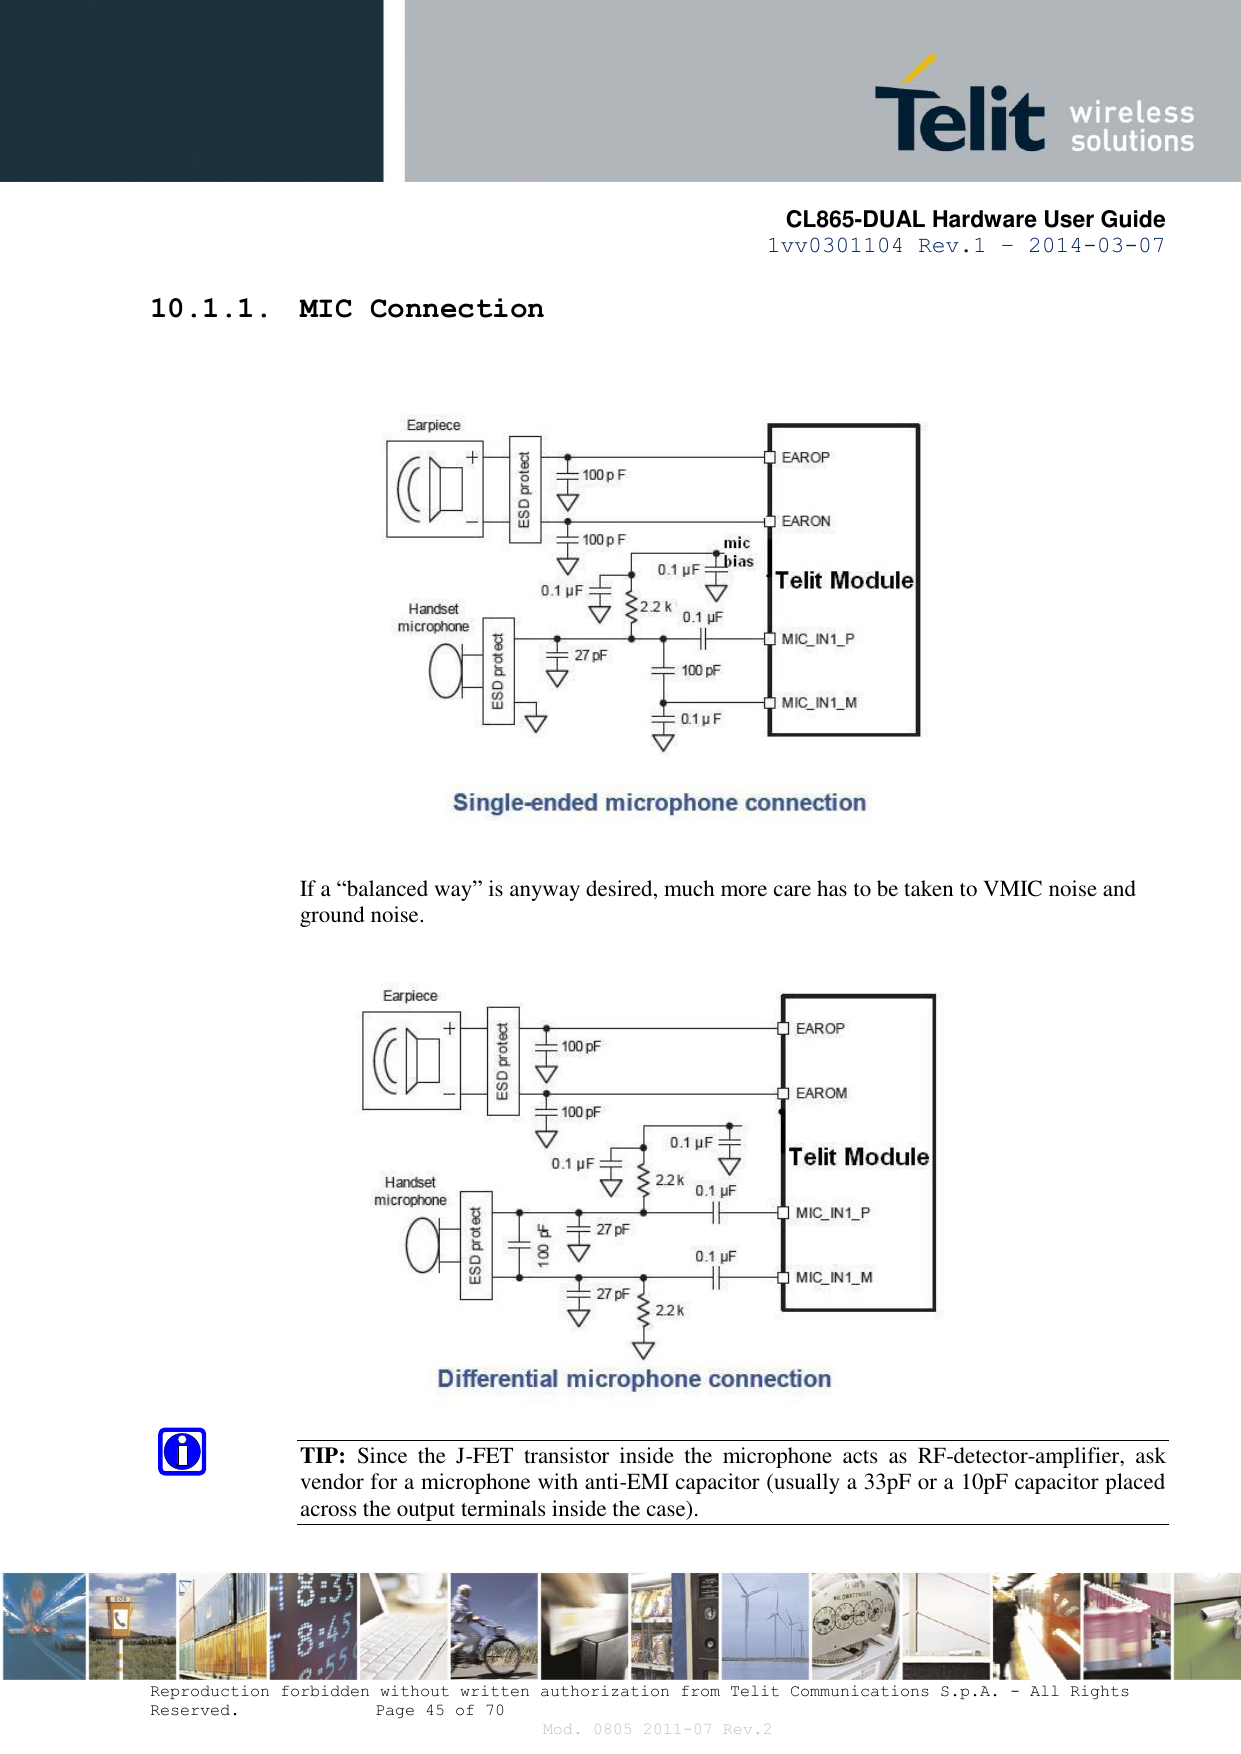       CL865-DUAL Hardware User Guide 1vv0301104 Rev.1 – 2014-03-07  Reproduction forbidden without written authorization from Telit Communications S.p.A. - All Rights Reserved.    Page 45 of 70 Mod. 0805 2011-07 Rev.2 10.1.1. MIC Connection    If a “balanced way” is anyway desired, much more care has to be taken to VMIC noise and ground noise.   TIP:  Since  the  J-FET  transistor  inside  the  microphone  acts  as  RF-detector-amplifier,  ask vendor for a microphone with anti-EMI capacitor (usually a 33pF or a 10pF capacitor placed across the output terminals inside the case).  